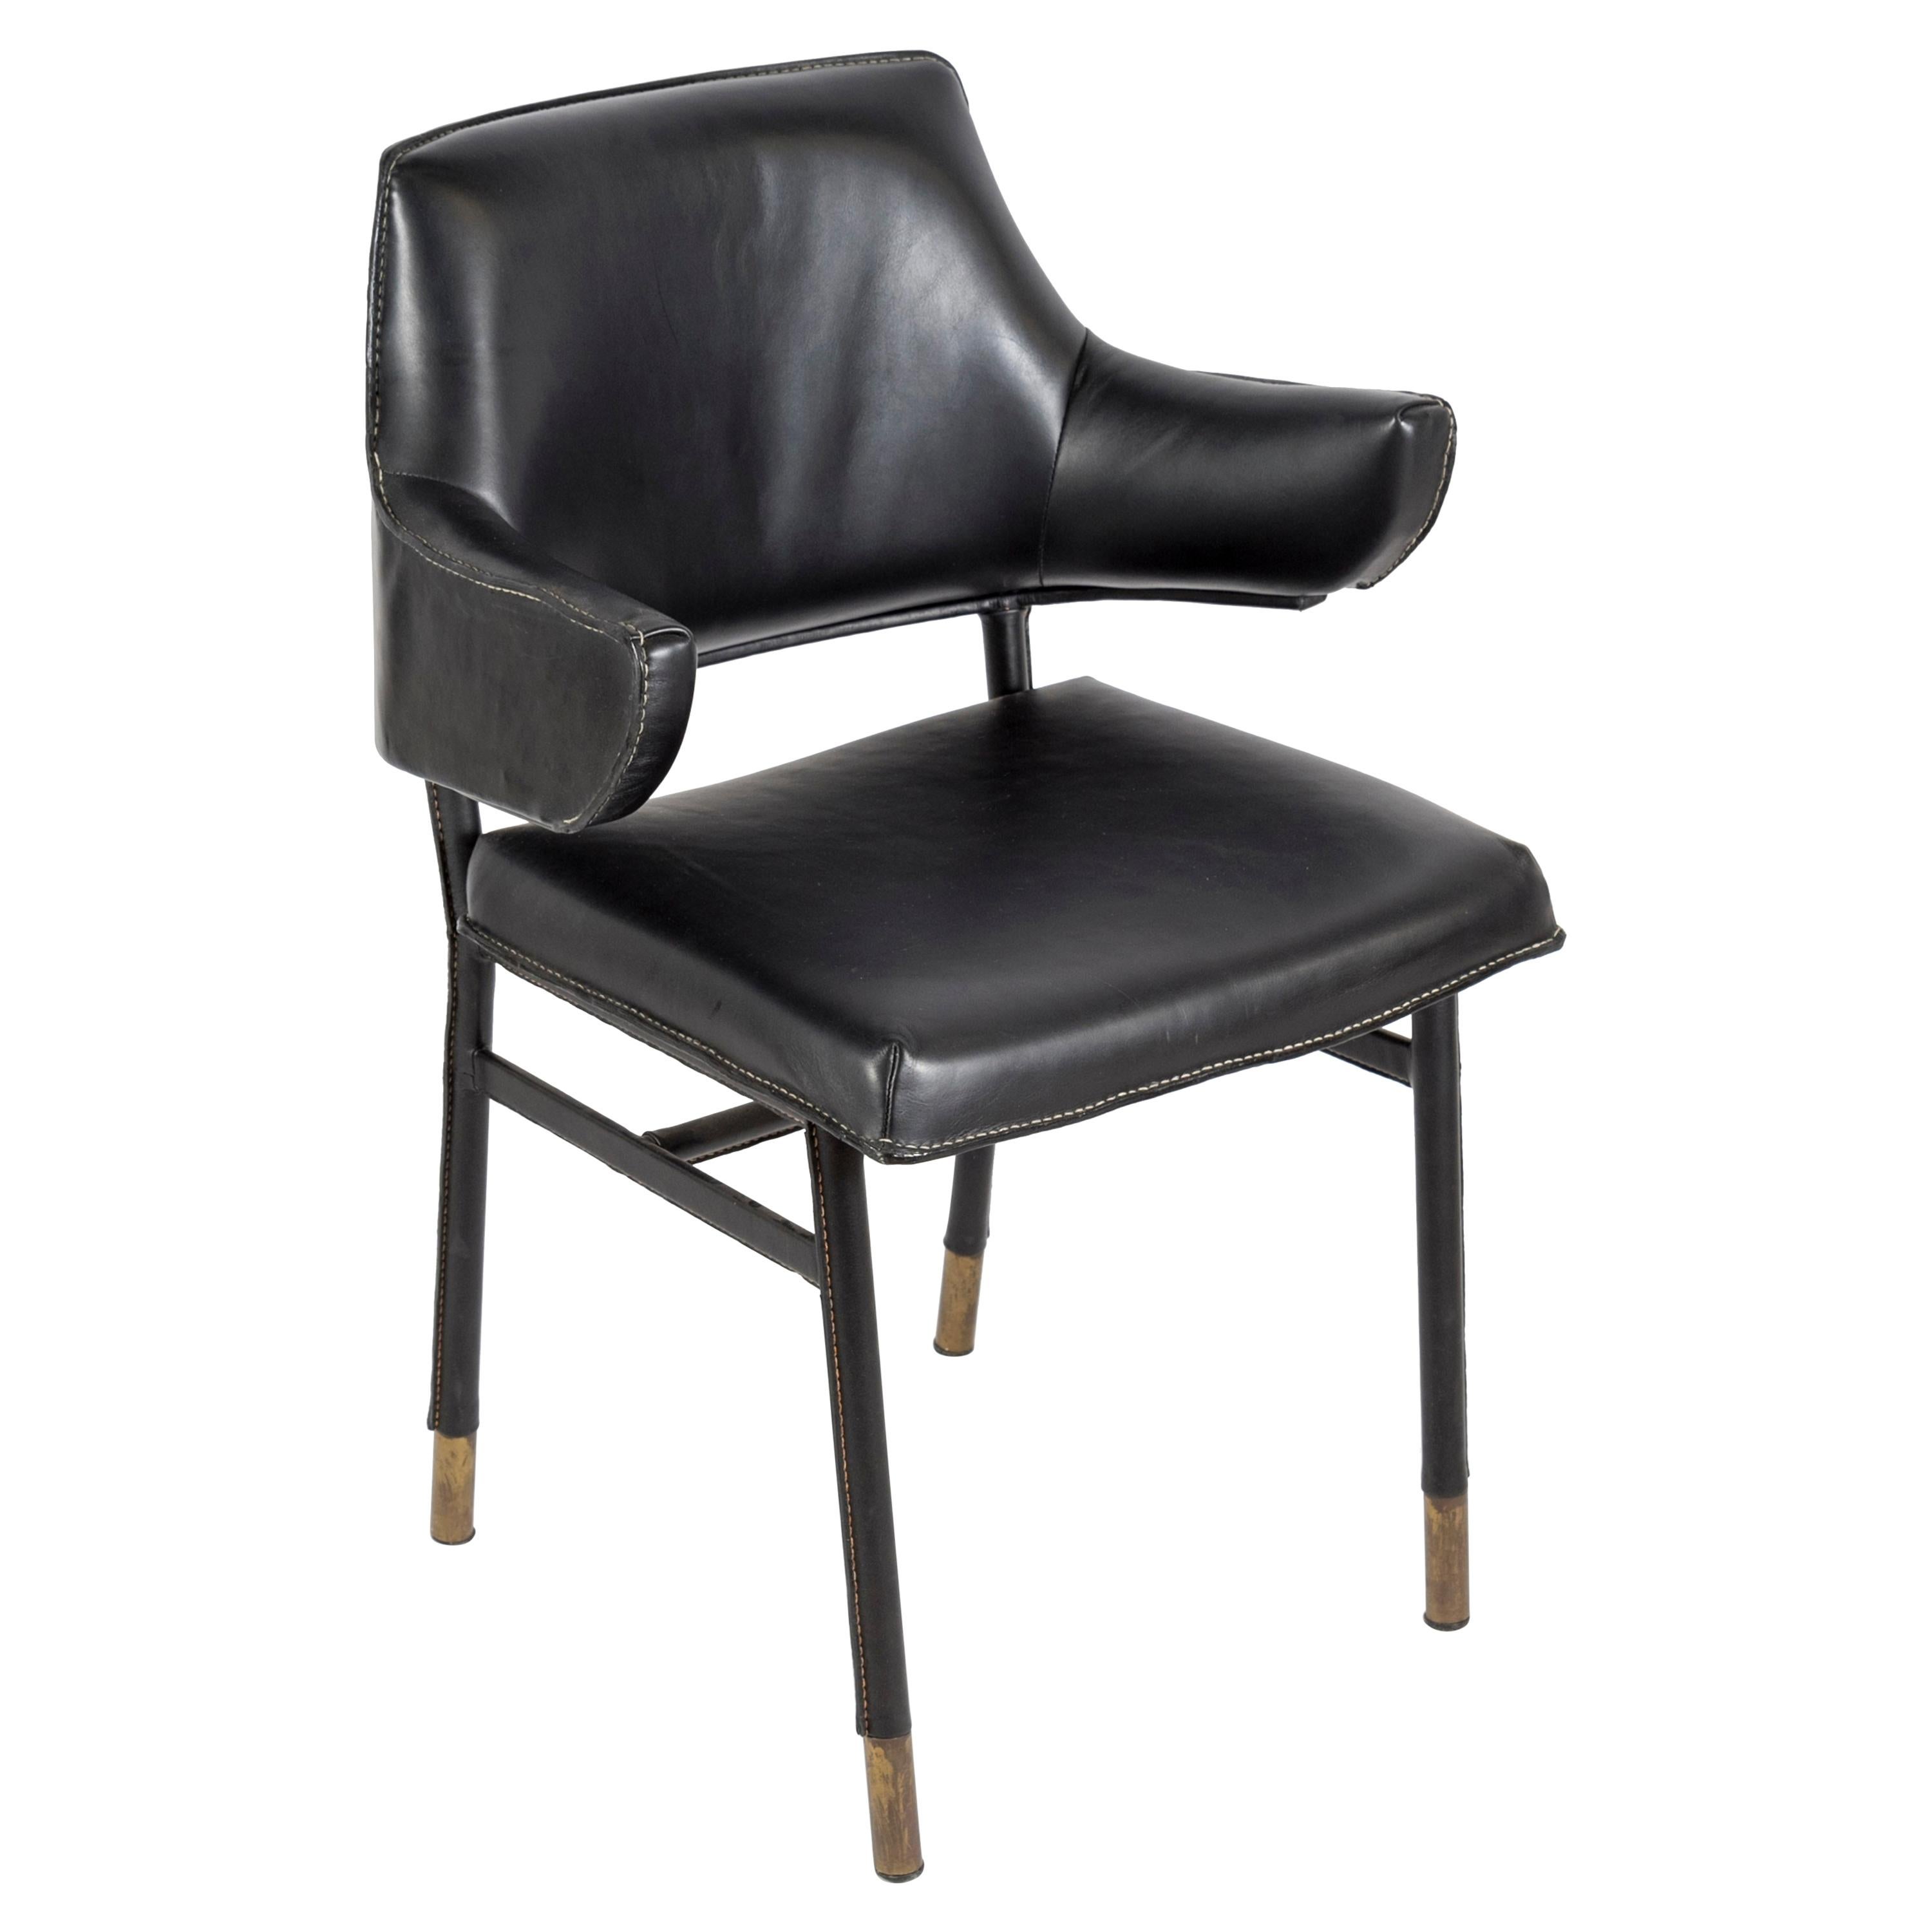 1950's Stitched Leather Armchair by Jacques Adnet